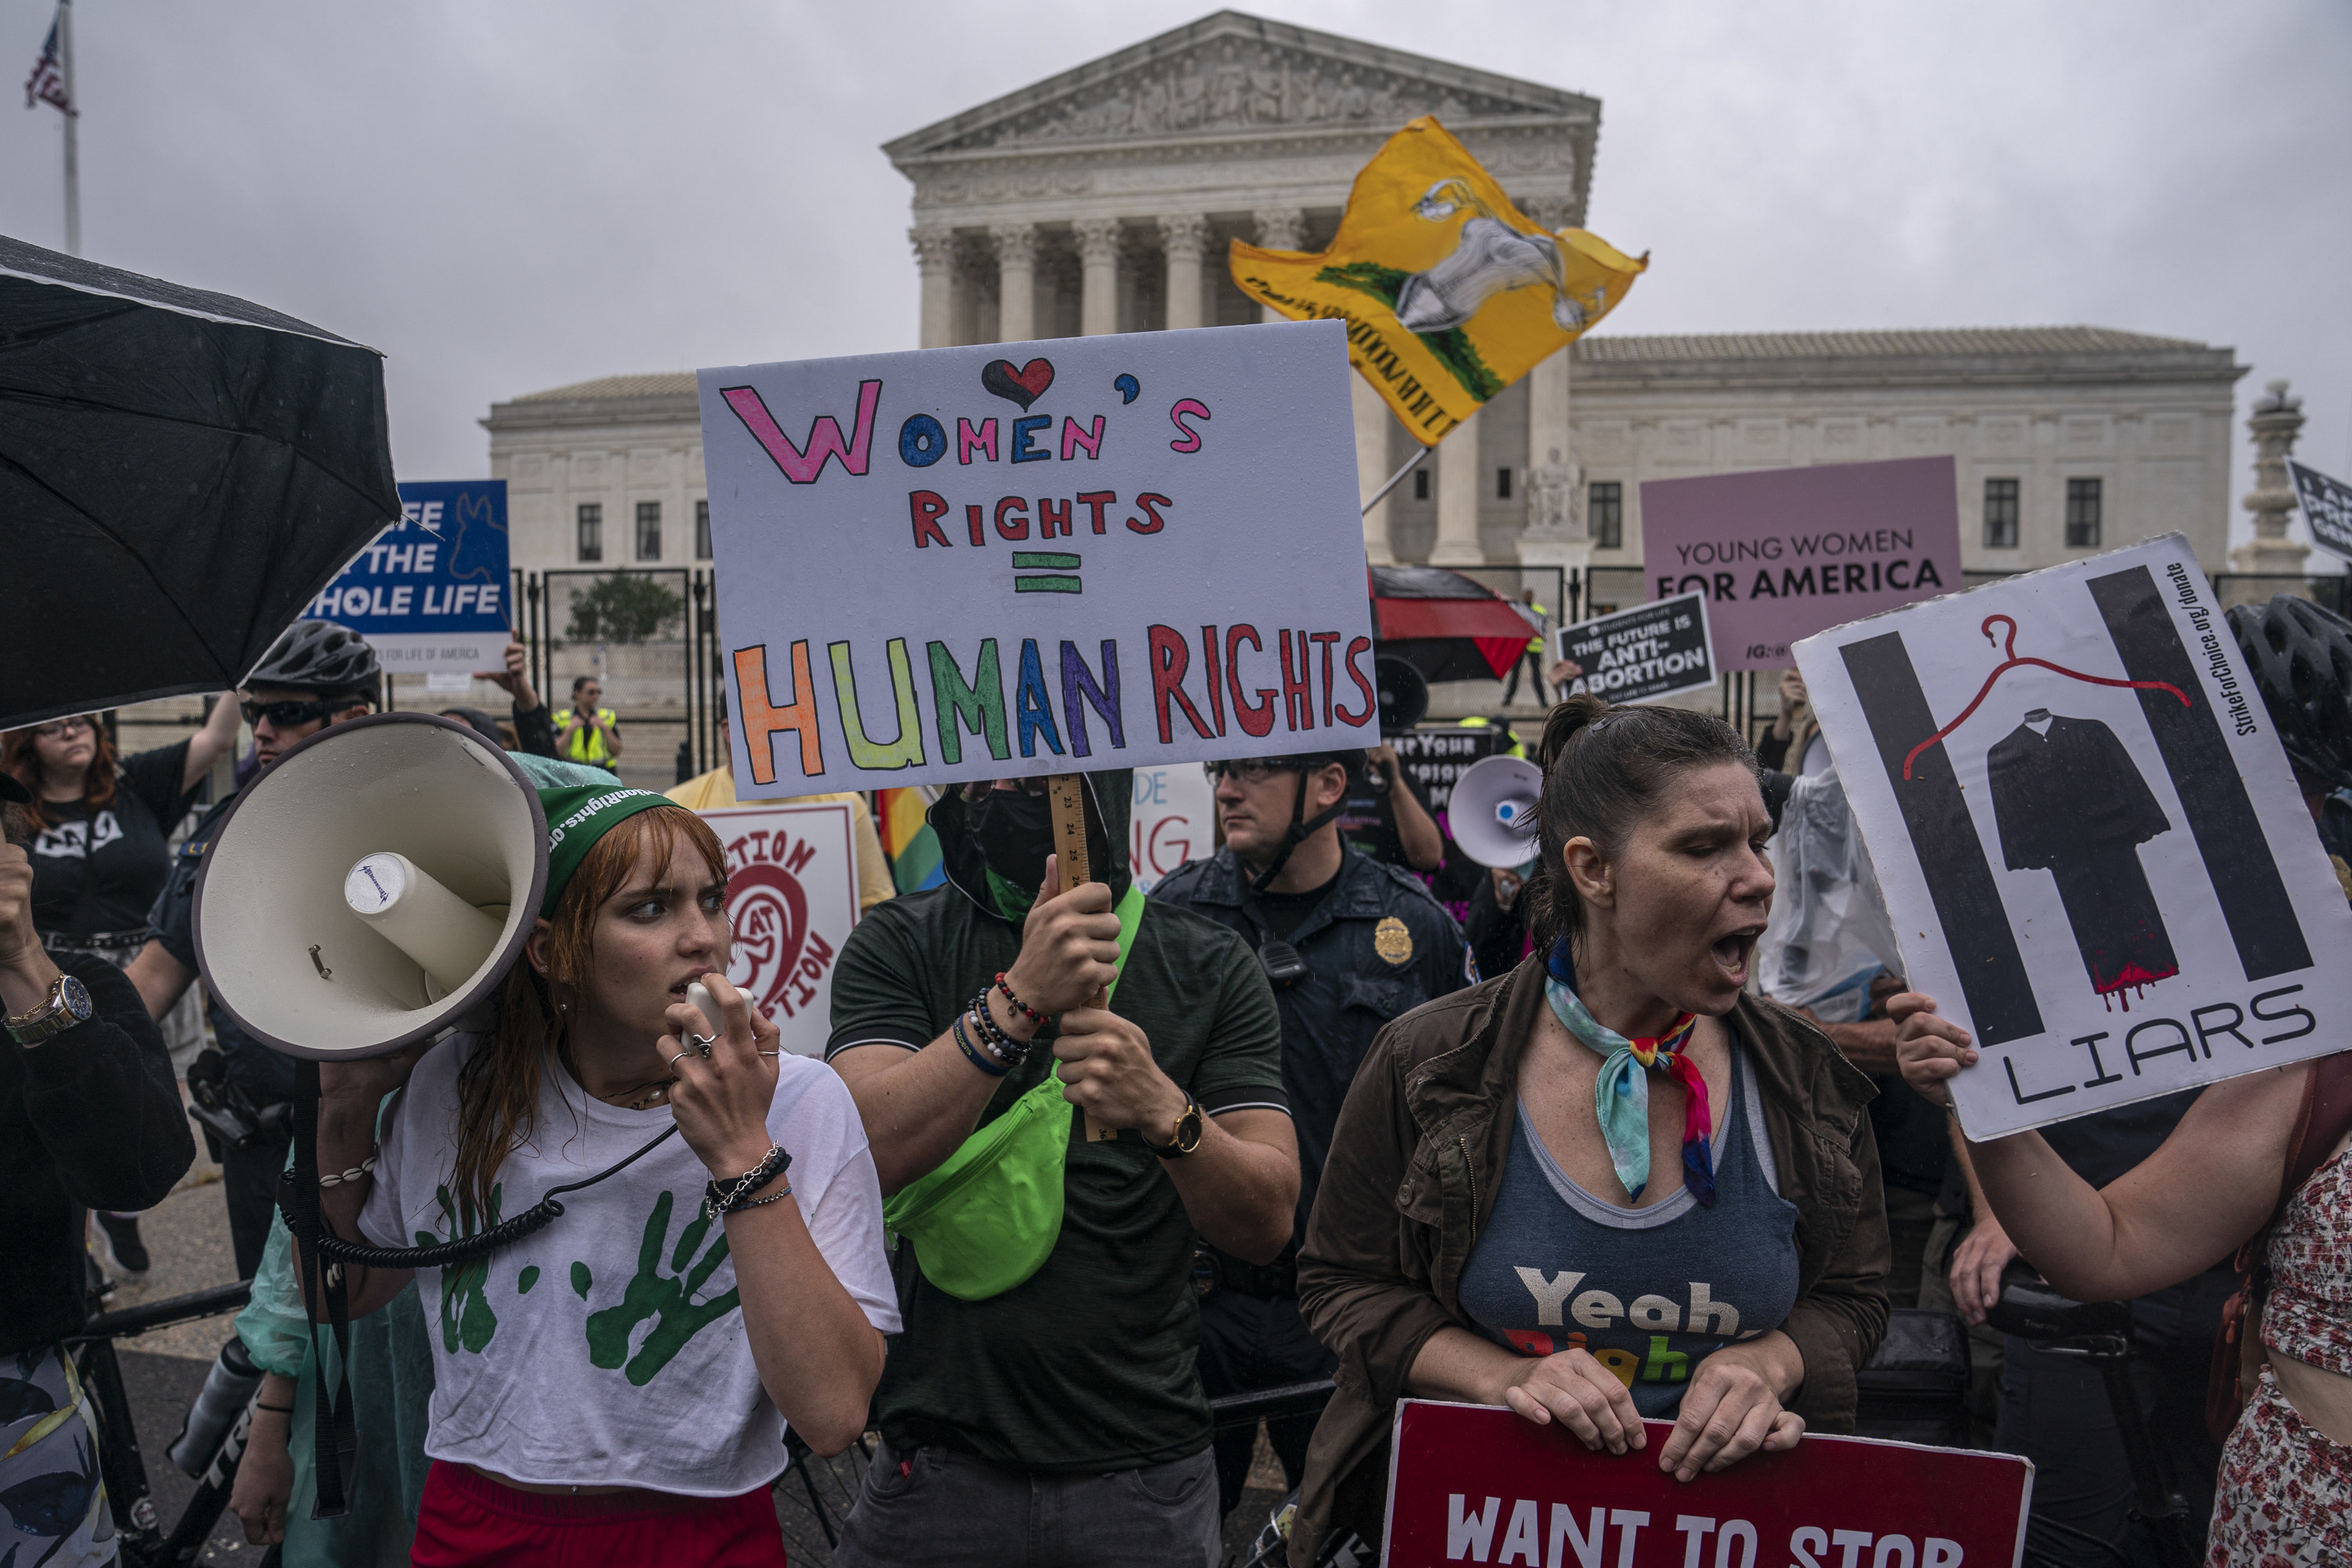 pro-choice protests in DC after the overturning of Roe v. Wade